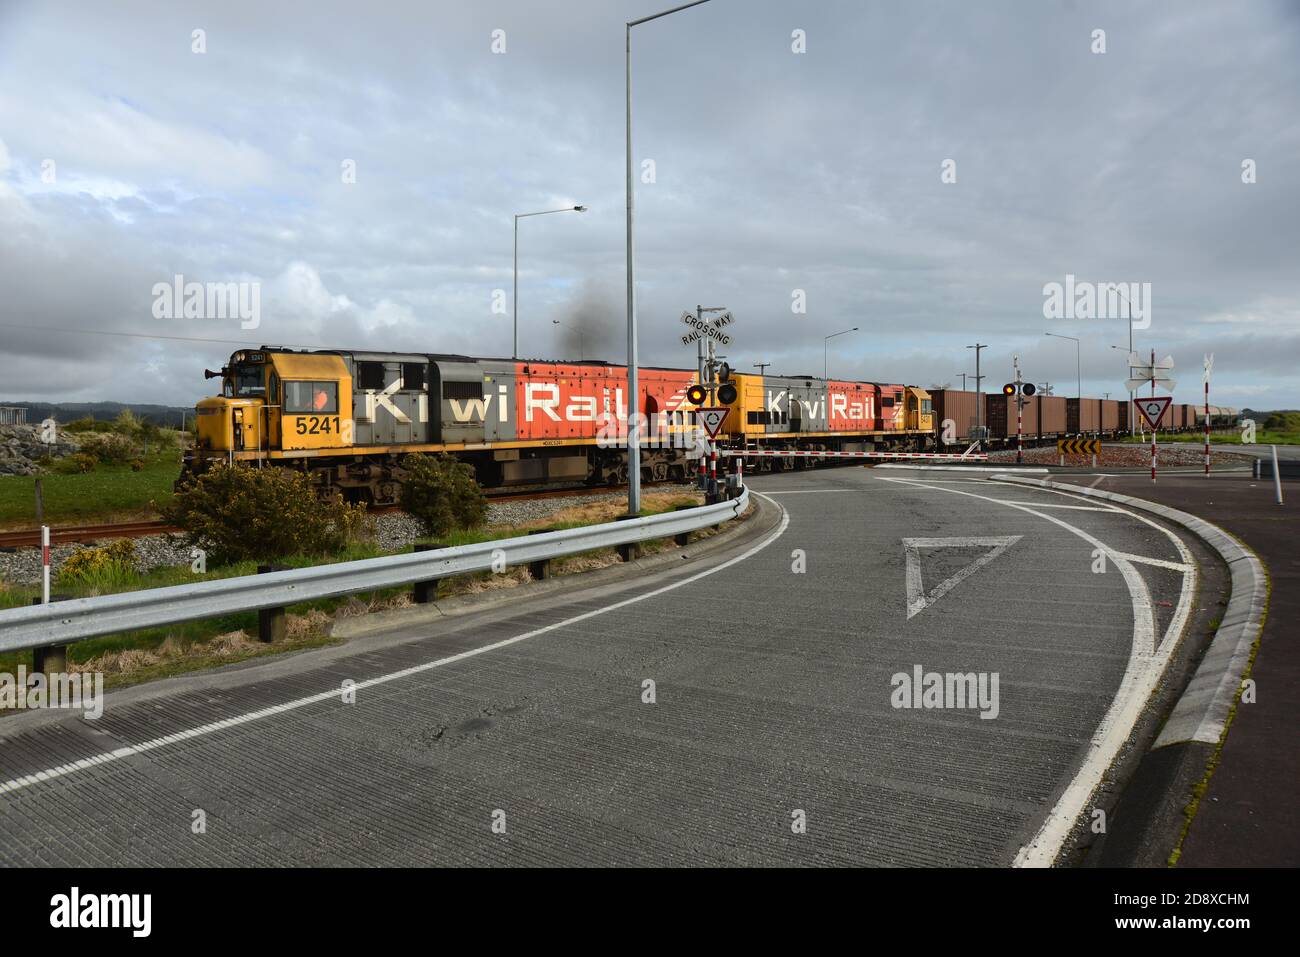 ARAHURA, NEW ZEALAND, AUGUST 29, 2020: A freight train crosses the main road at Arahura on State Highway 6. Stock Photo